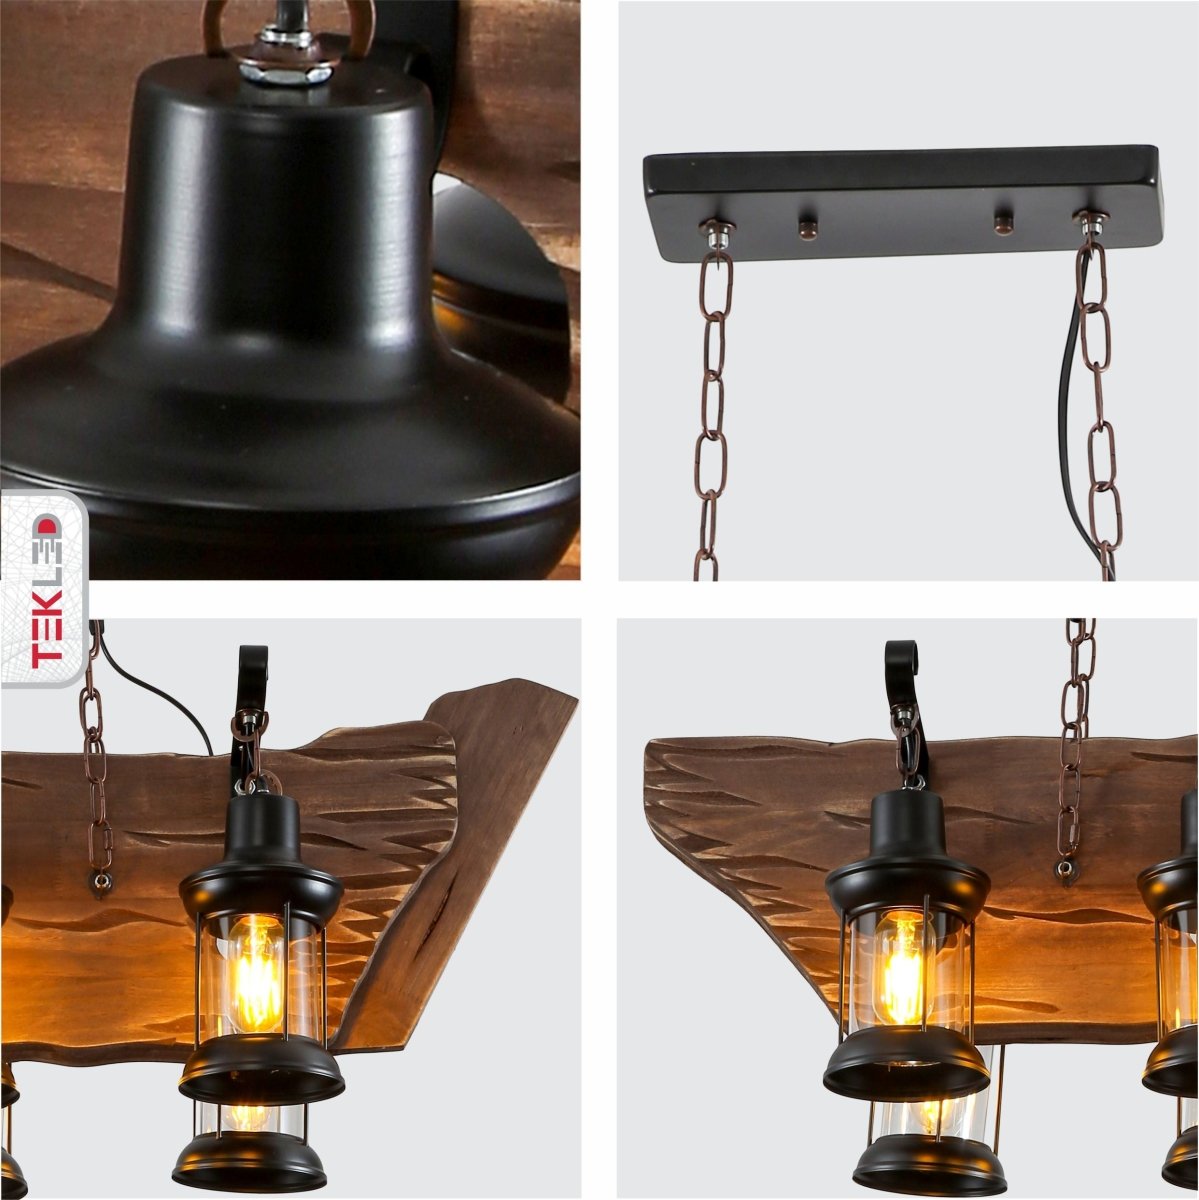 Detailed shots of Galley Iron and Wood Glass Cylinder Shade Island Chandelier Light 6xE27 | TEKLED 159-17842